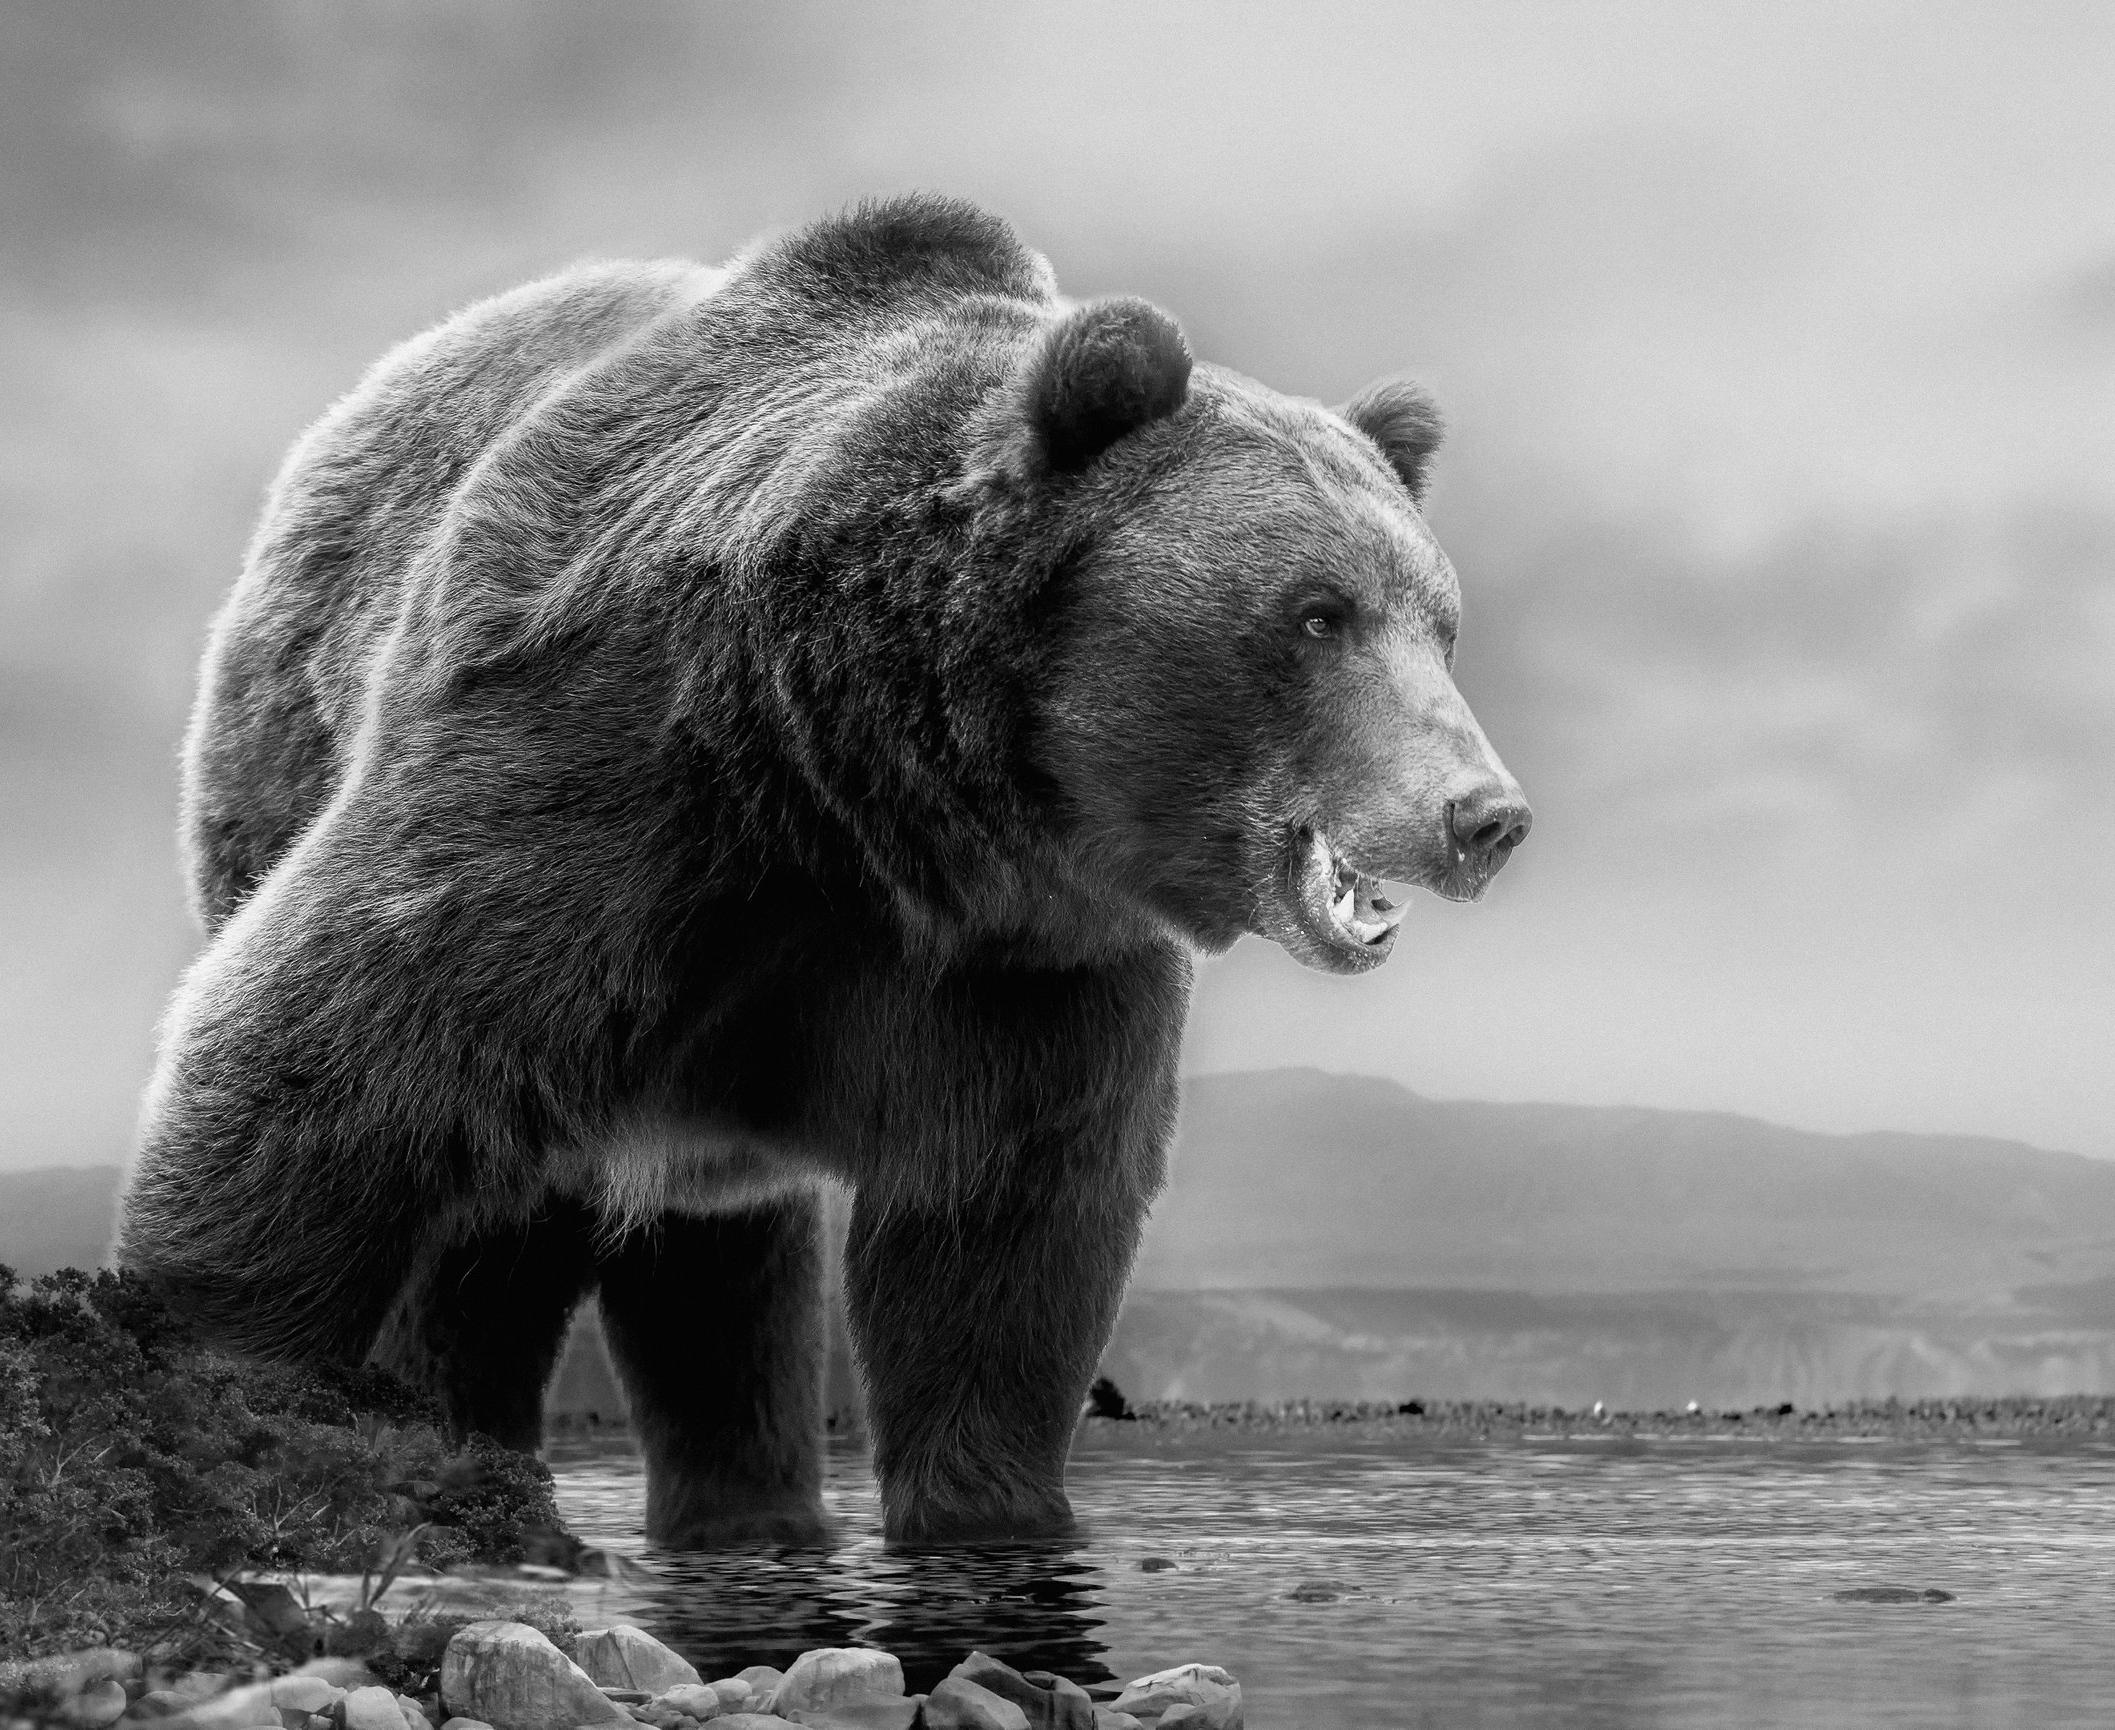 Shane Russeck Black and White Photograph - "On The Waterfront" 36x48 Black & White Photography Kodiak Grizzly Bear Signed